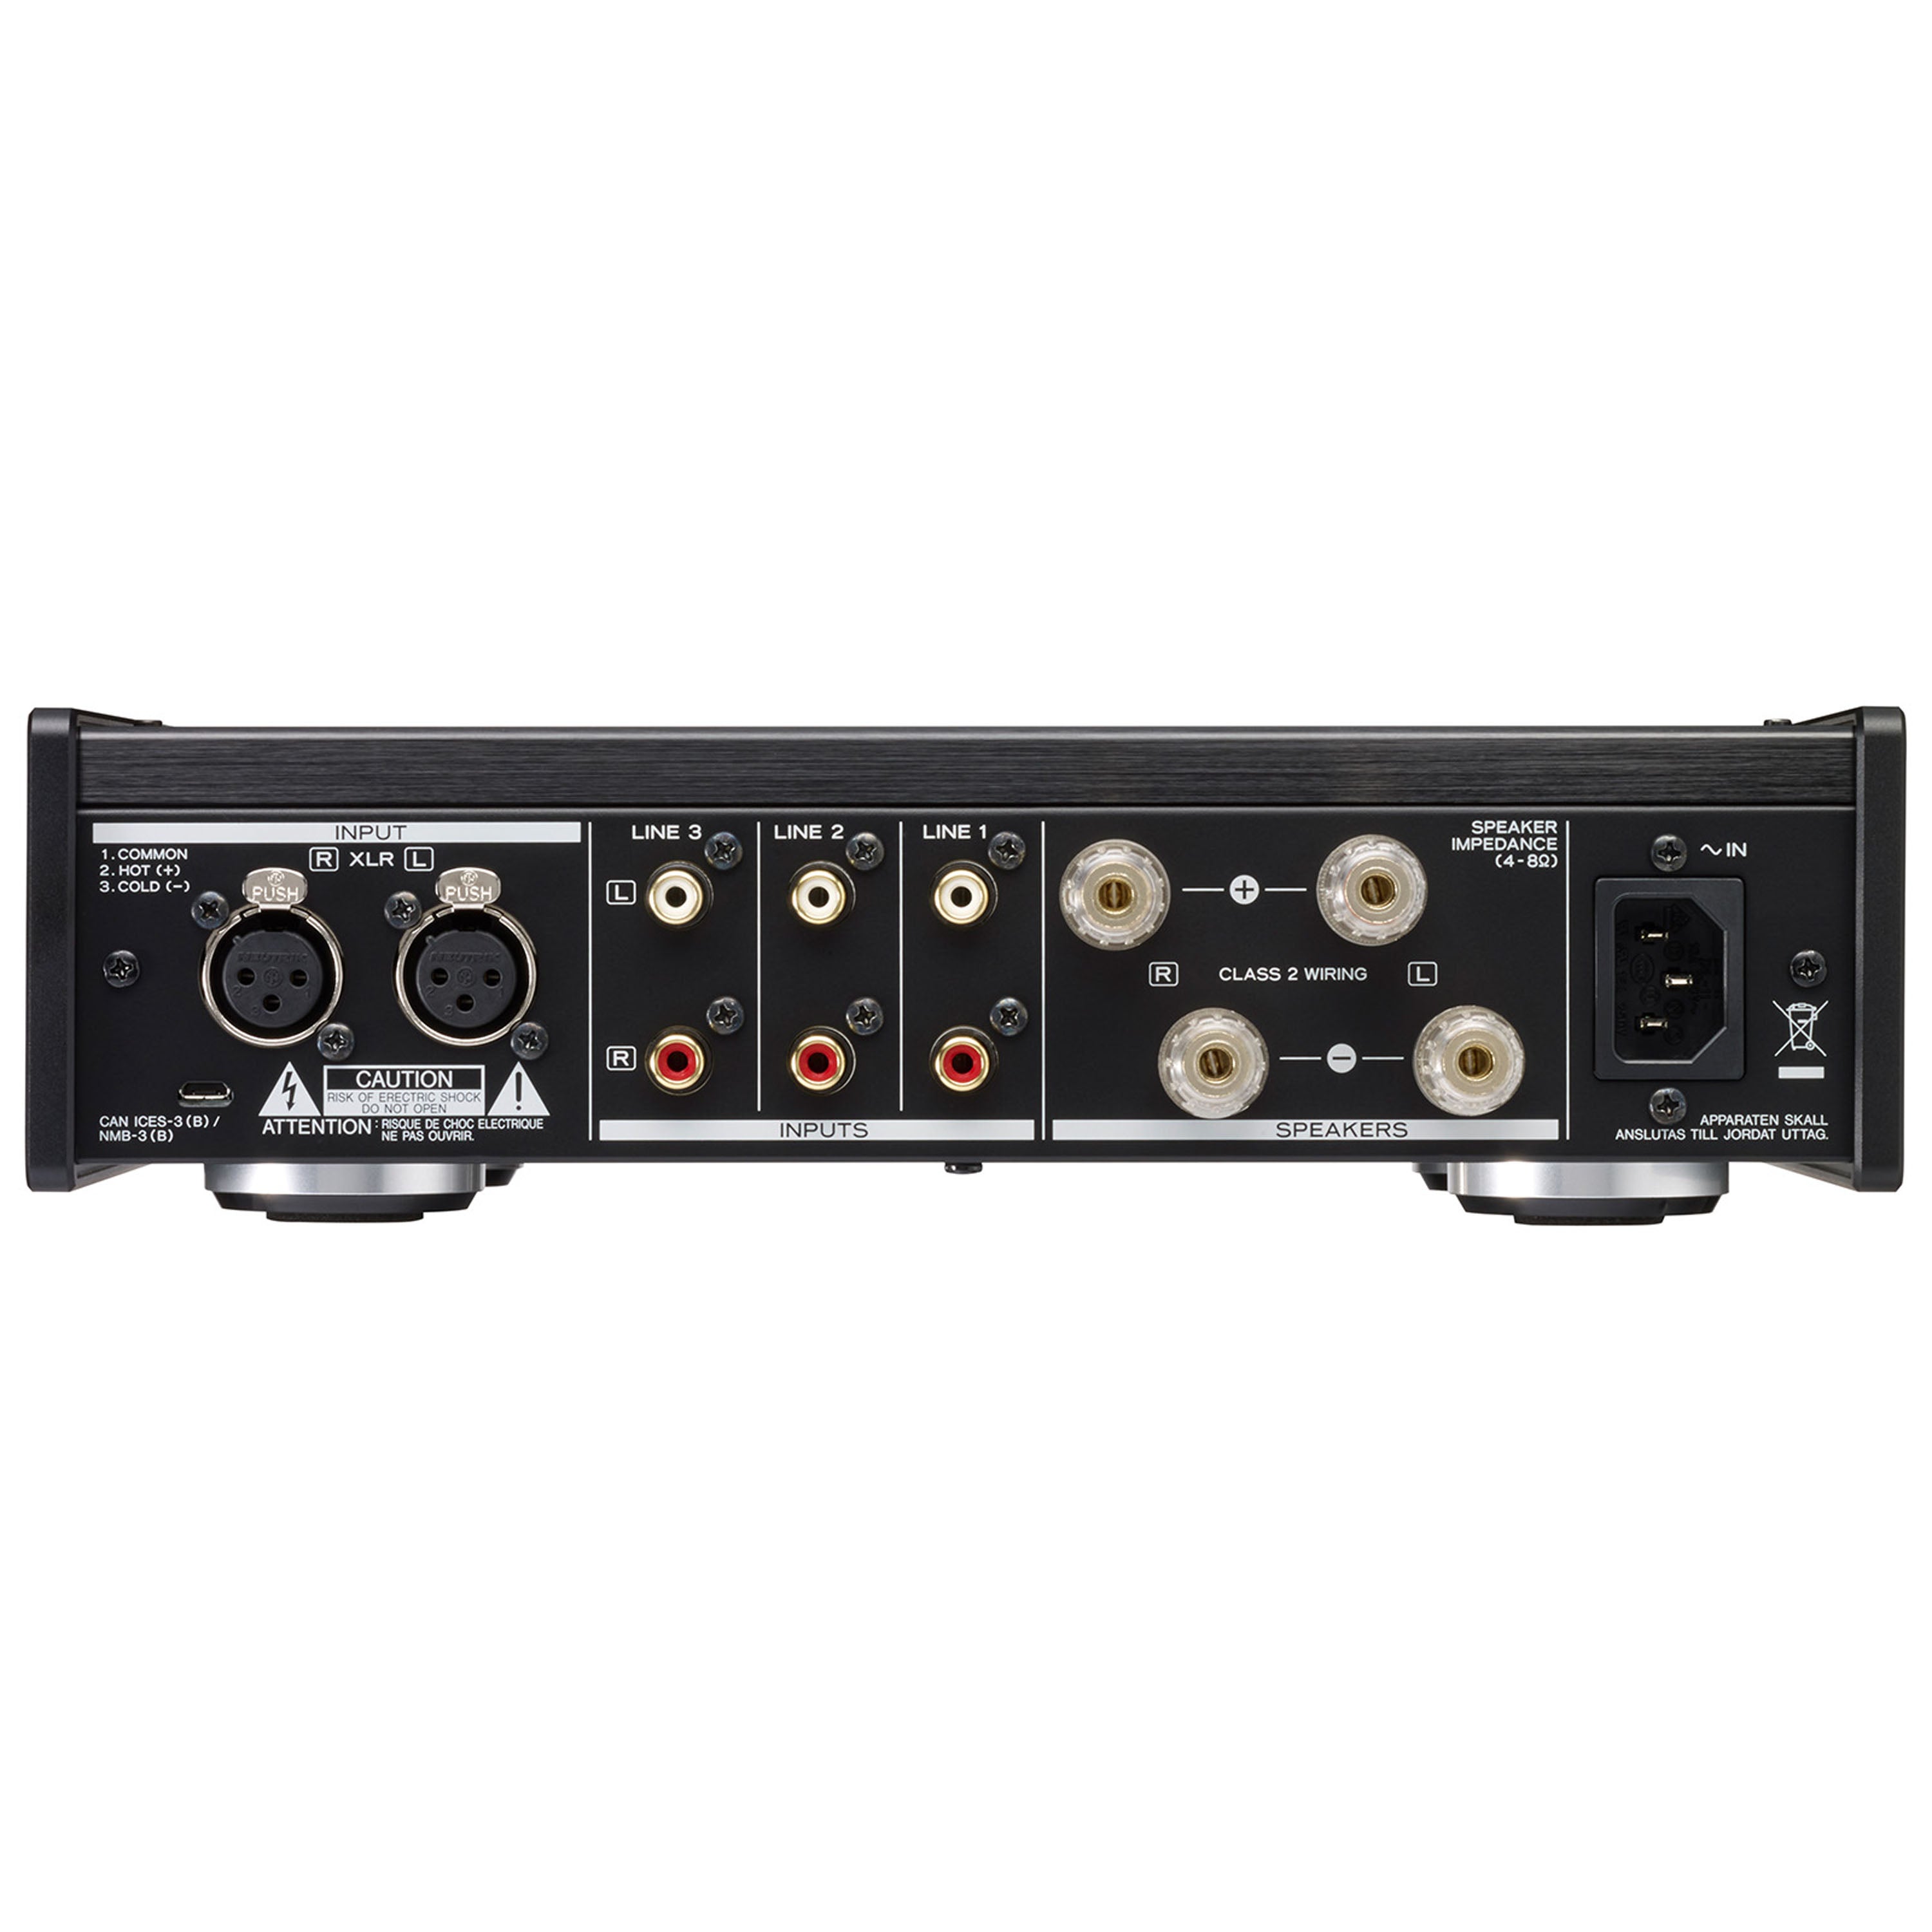 TEAC AX-505 Stereo Integrated Amplifier (Black)